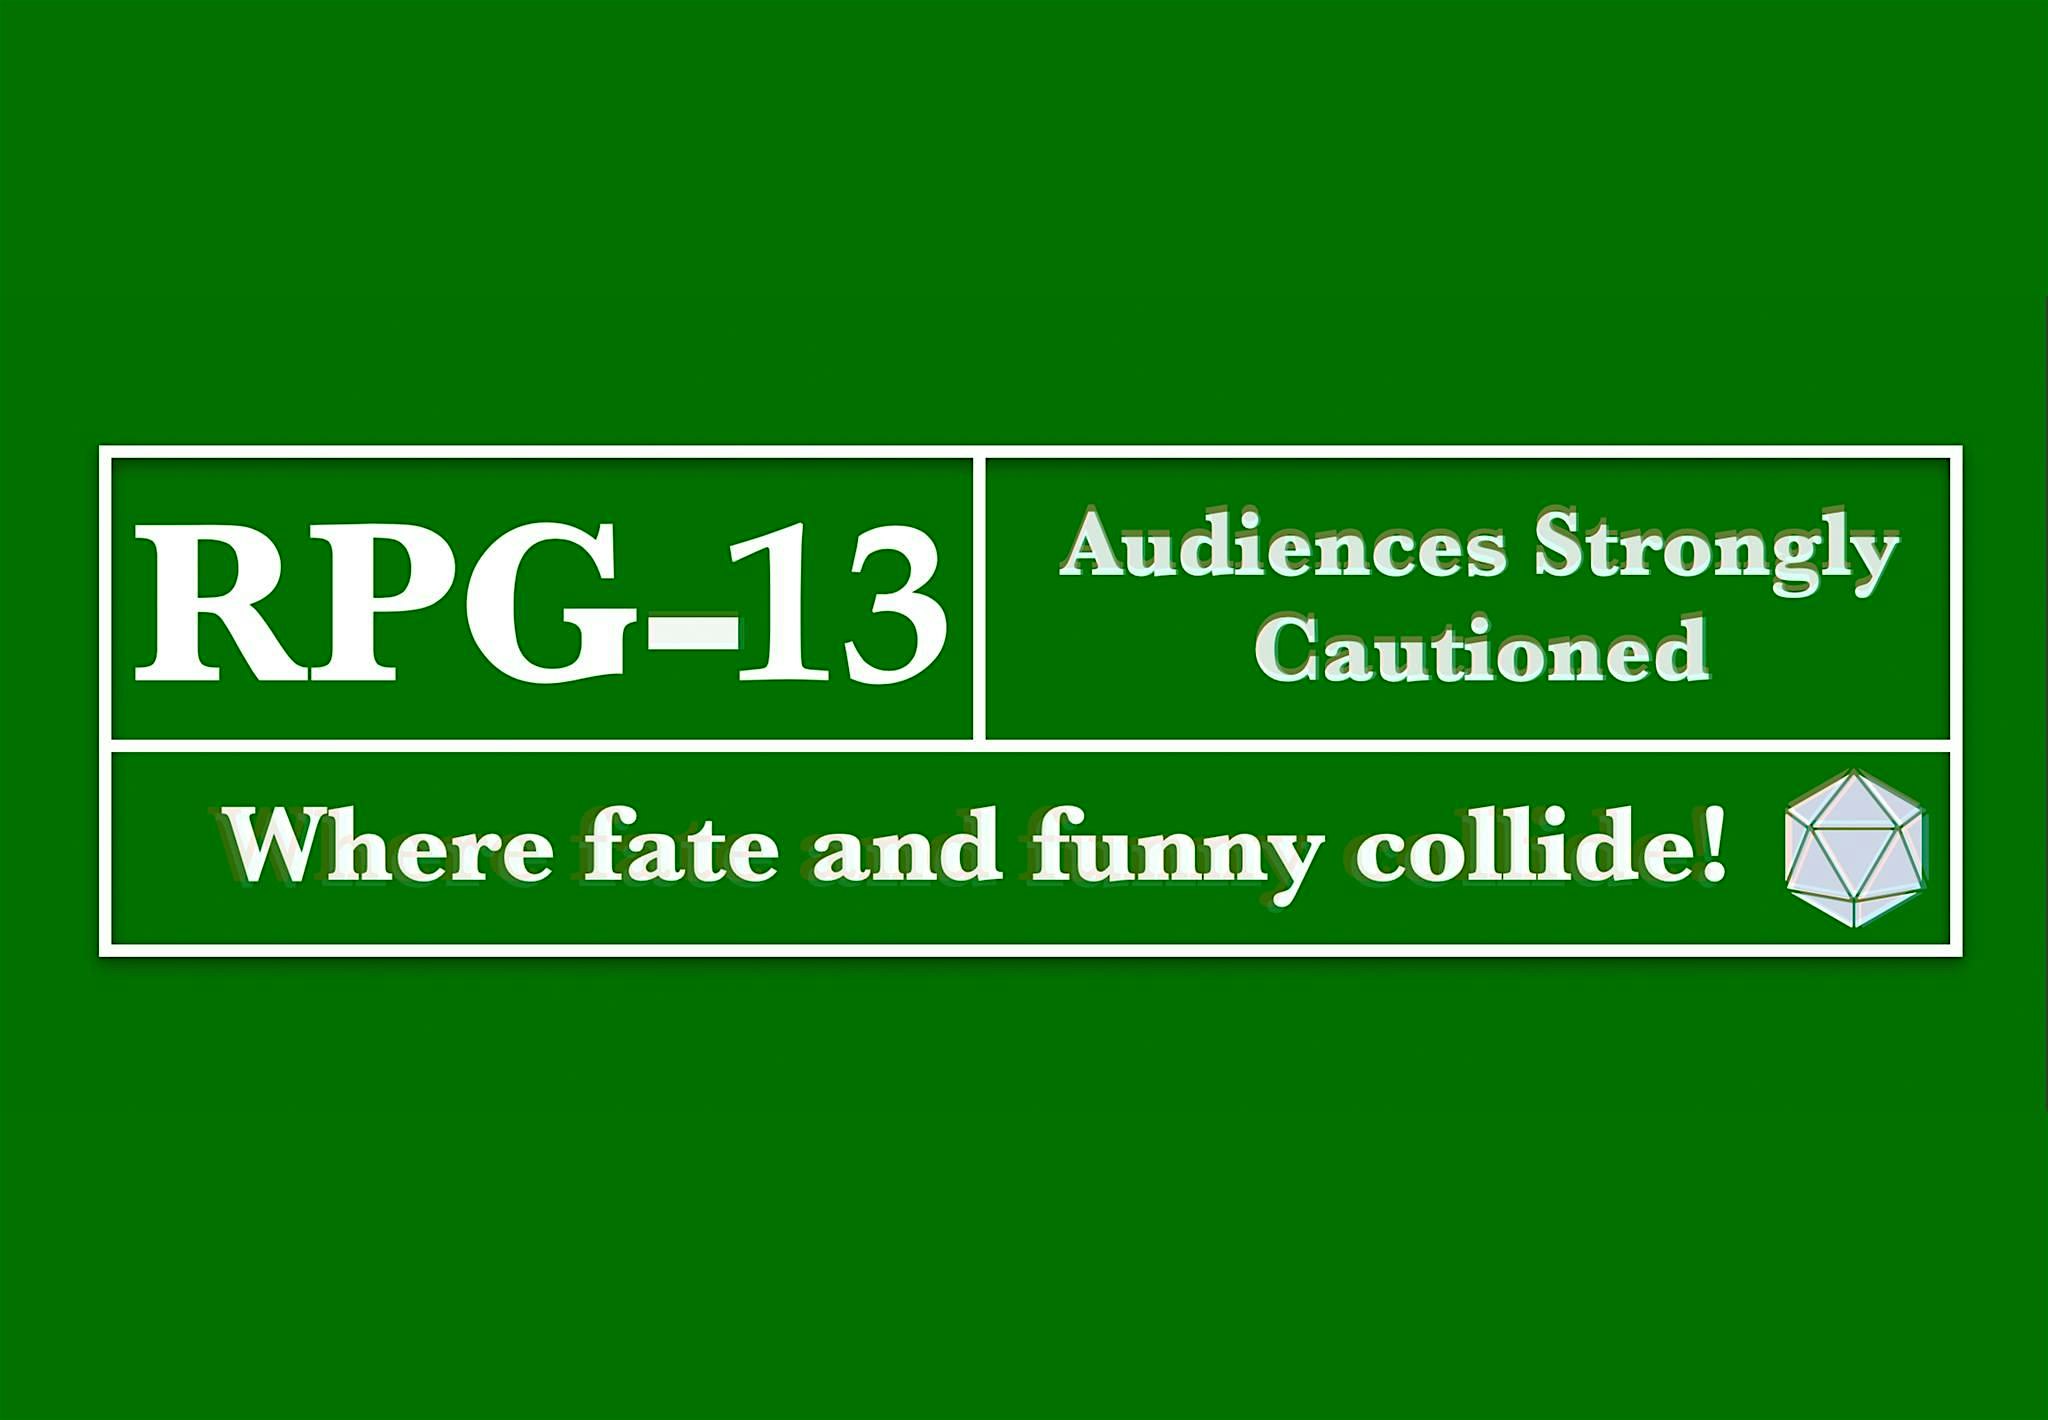 RPG-13: A Role Playing & Improv Comedy Show